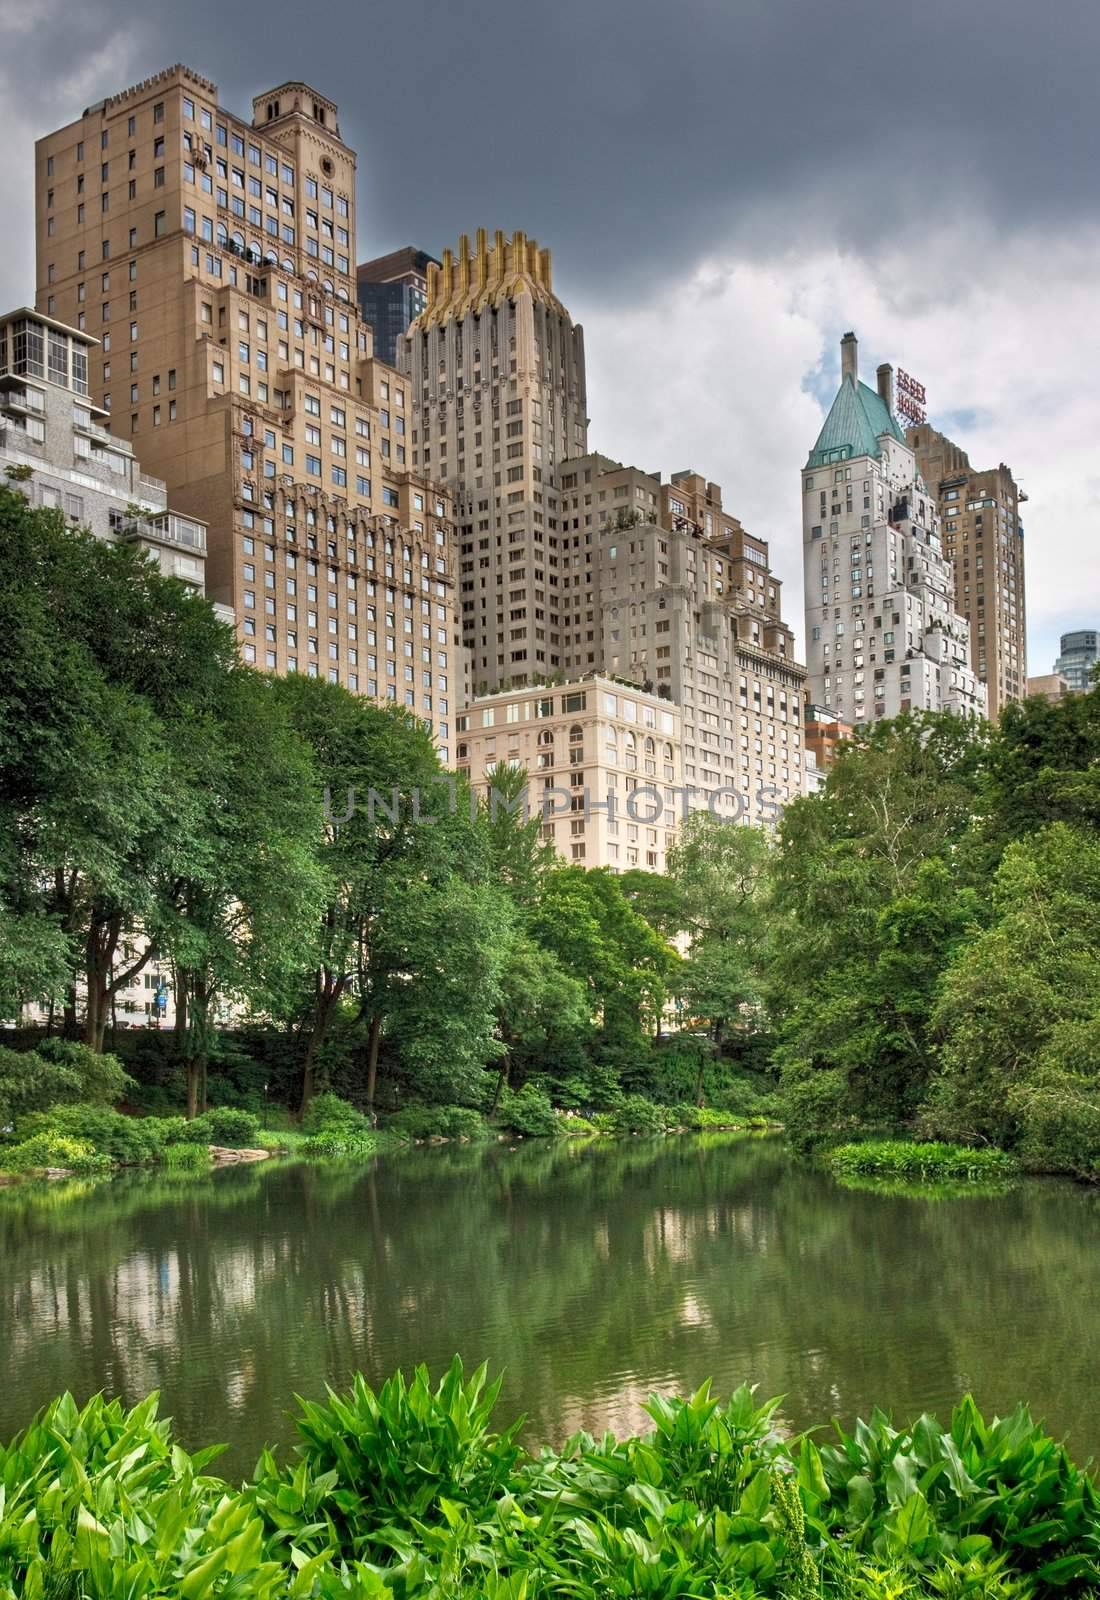 A pond in central park with high rise buildings behind it in New York City